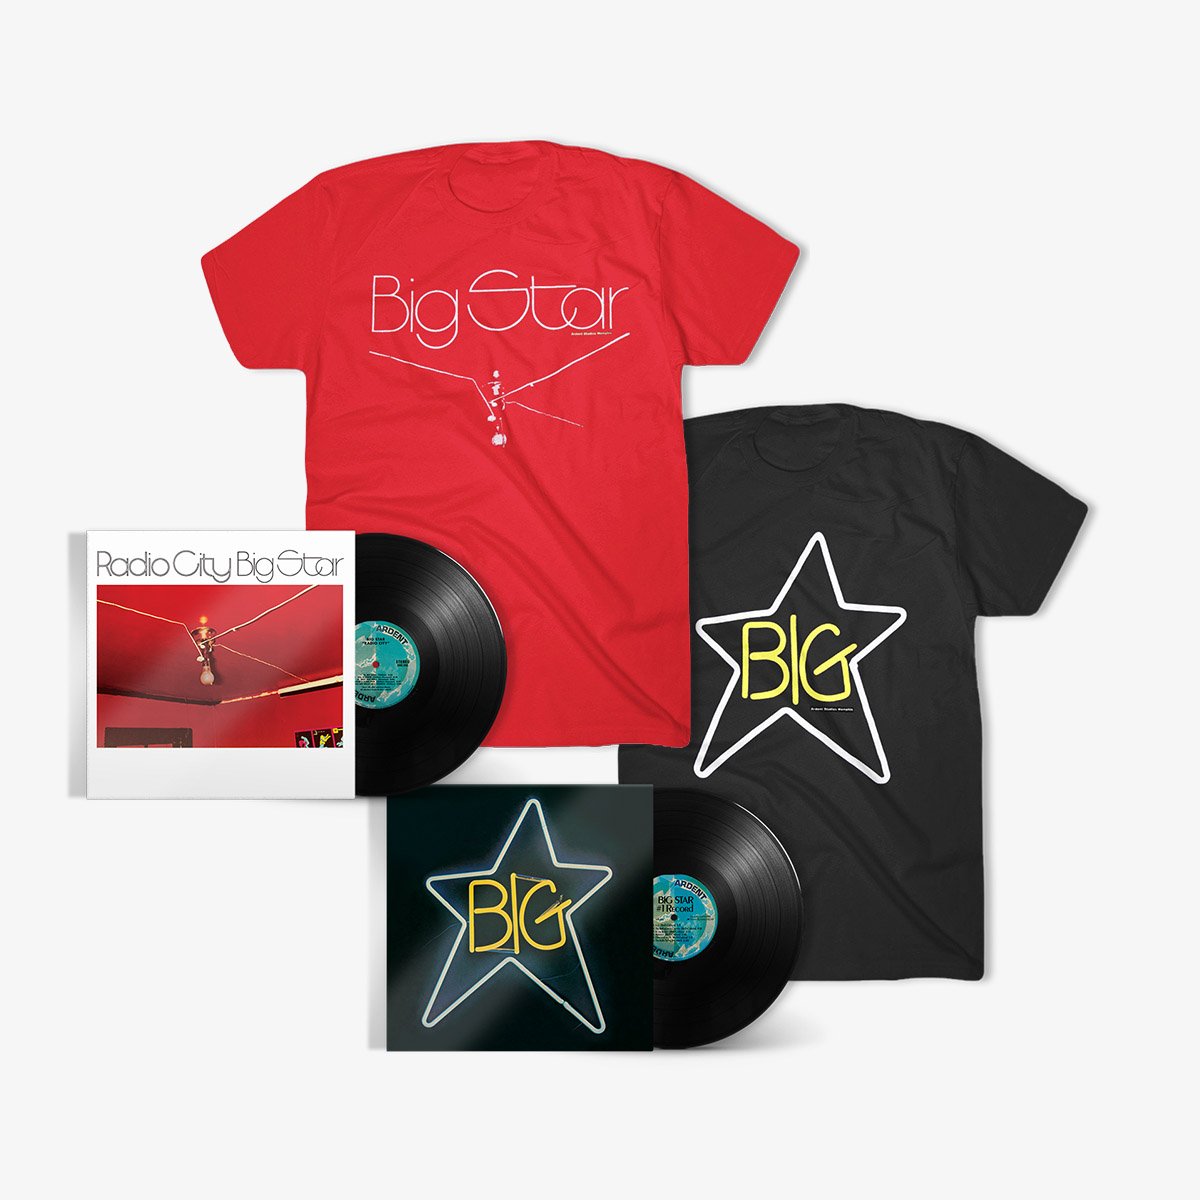 Featured image for “BIG STAR’S #1 RECORD AND RADIO CITY TO BE REISSUED ON 180-GRAM VINYL”